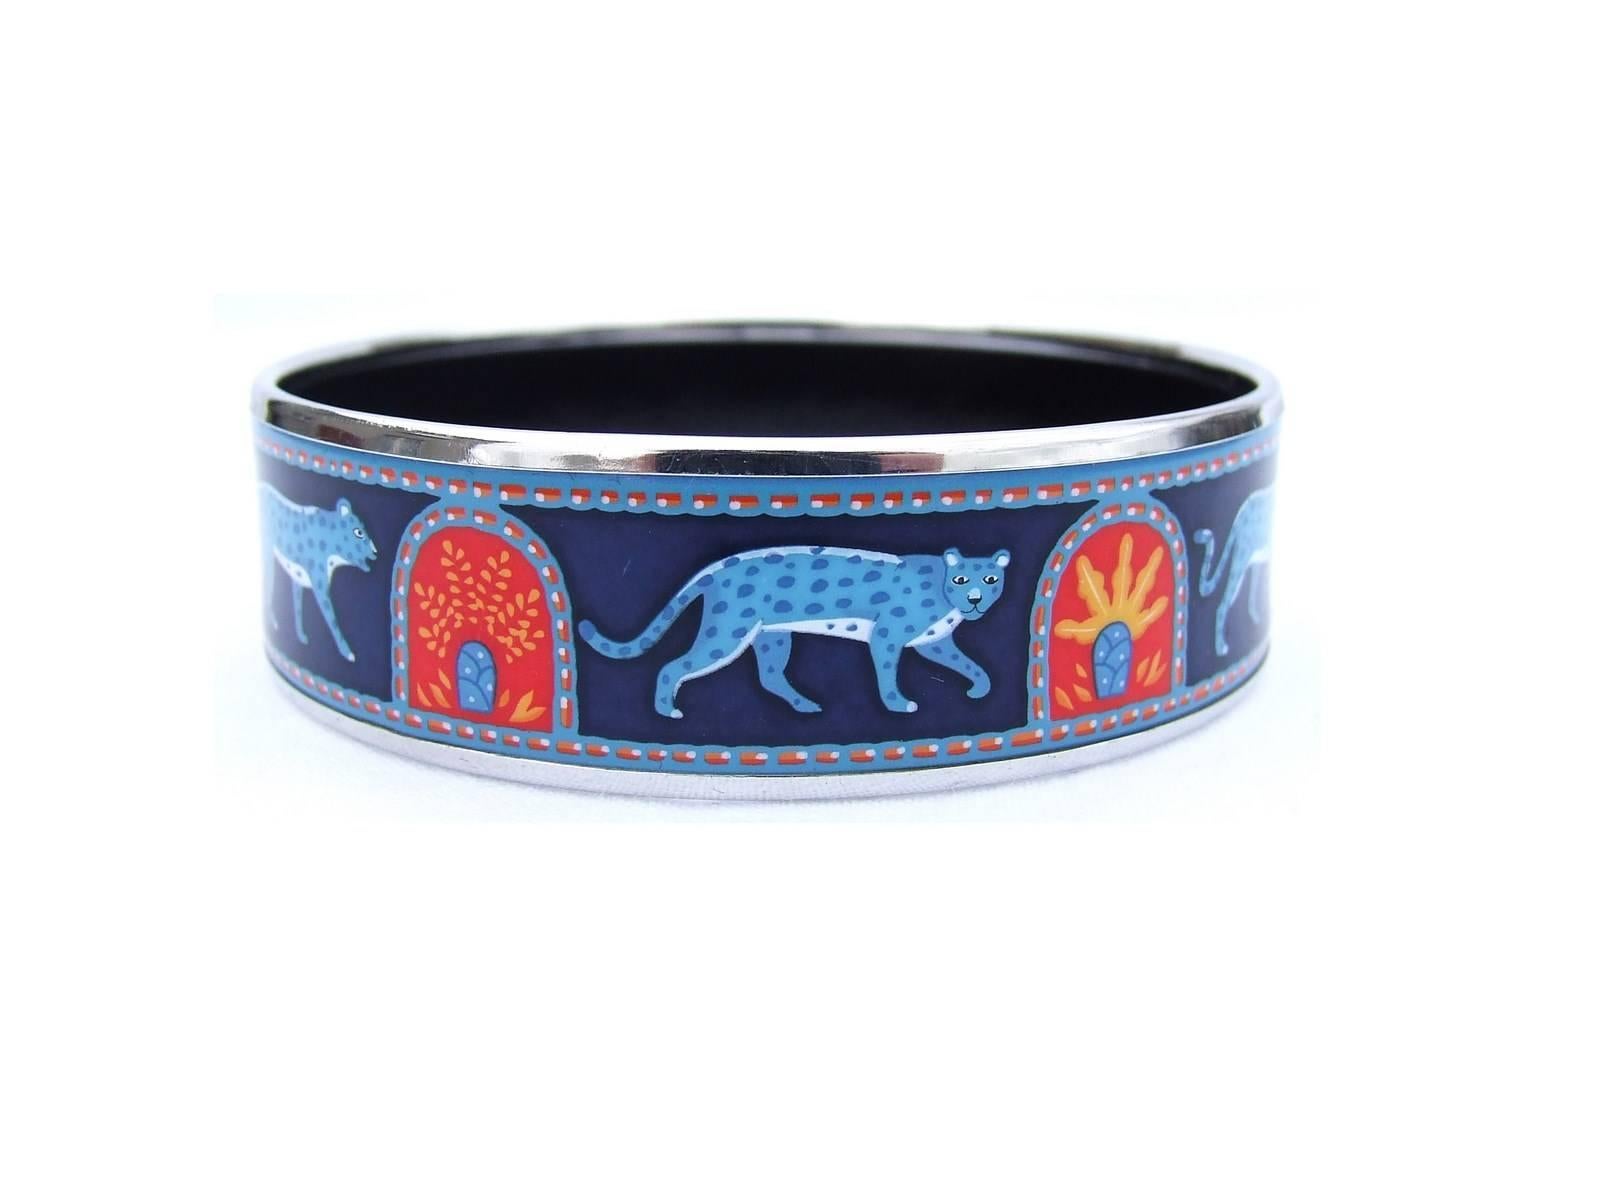 BEAUTIFUL AUTHENTIC HERMES BRACELET

 
Pattern: Panthers 

Made in Austria + E

Made of Enamel Printed and Palladium Plated Hardware (Silver-Tone)

Colorway: Deep Blue background, Blue Panthers, Orange-Red and Yellow Plants
 

